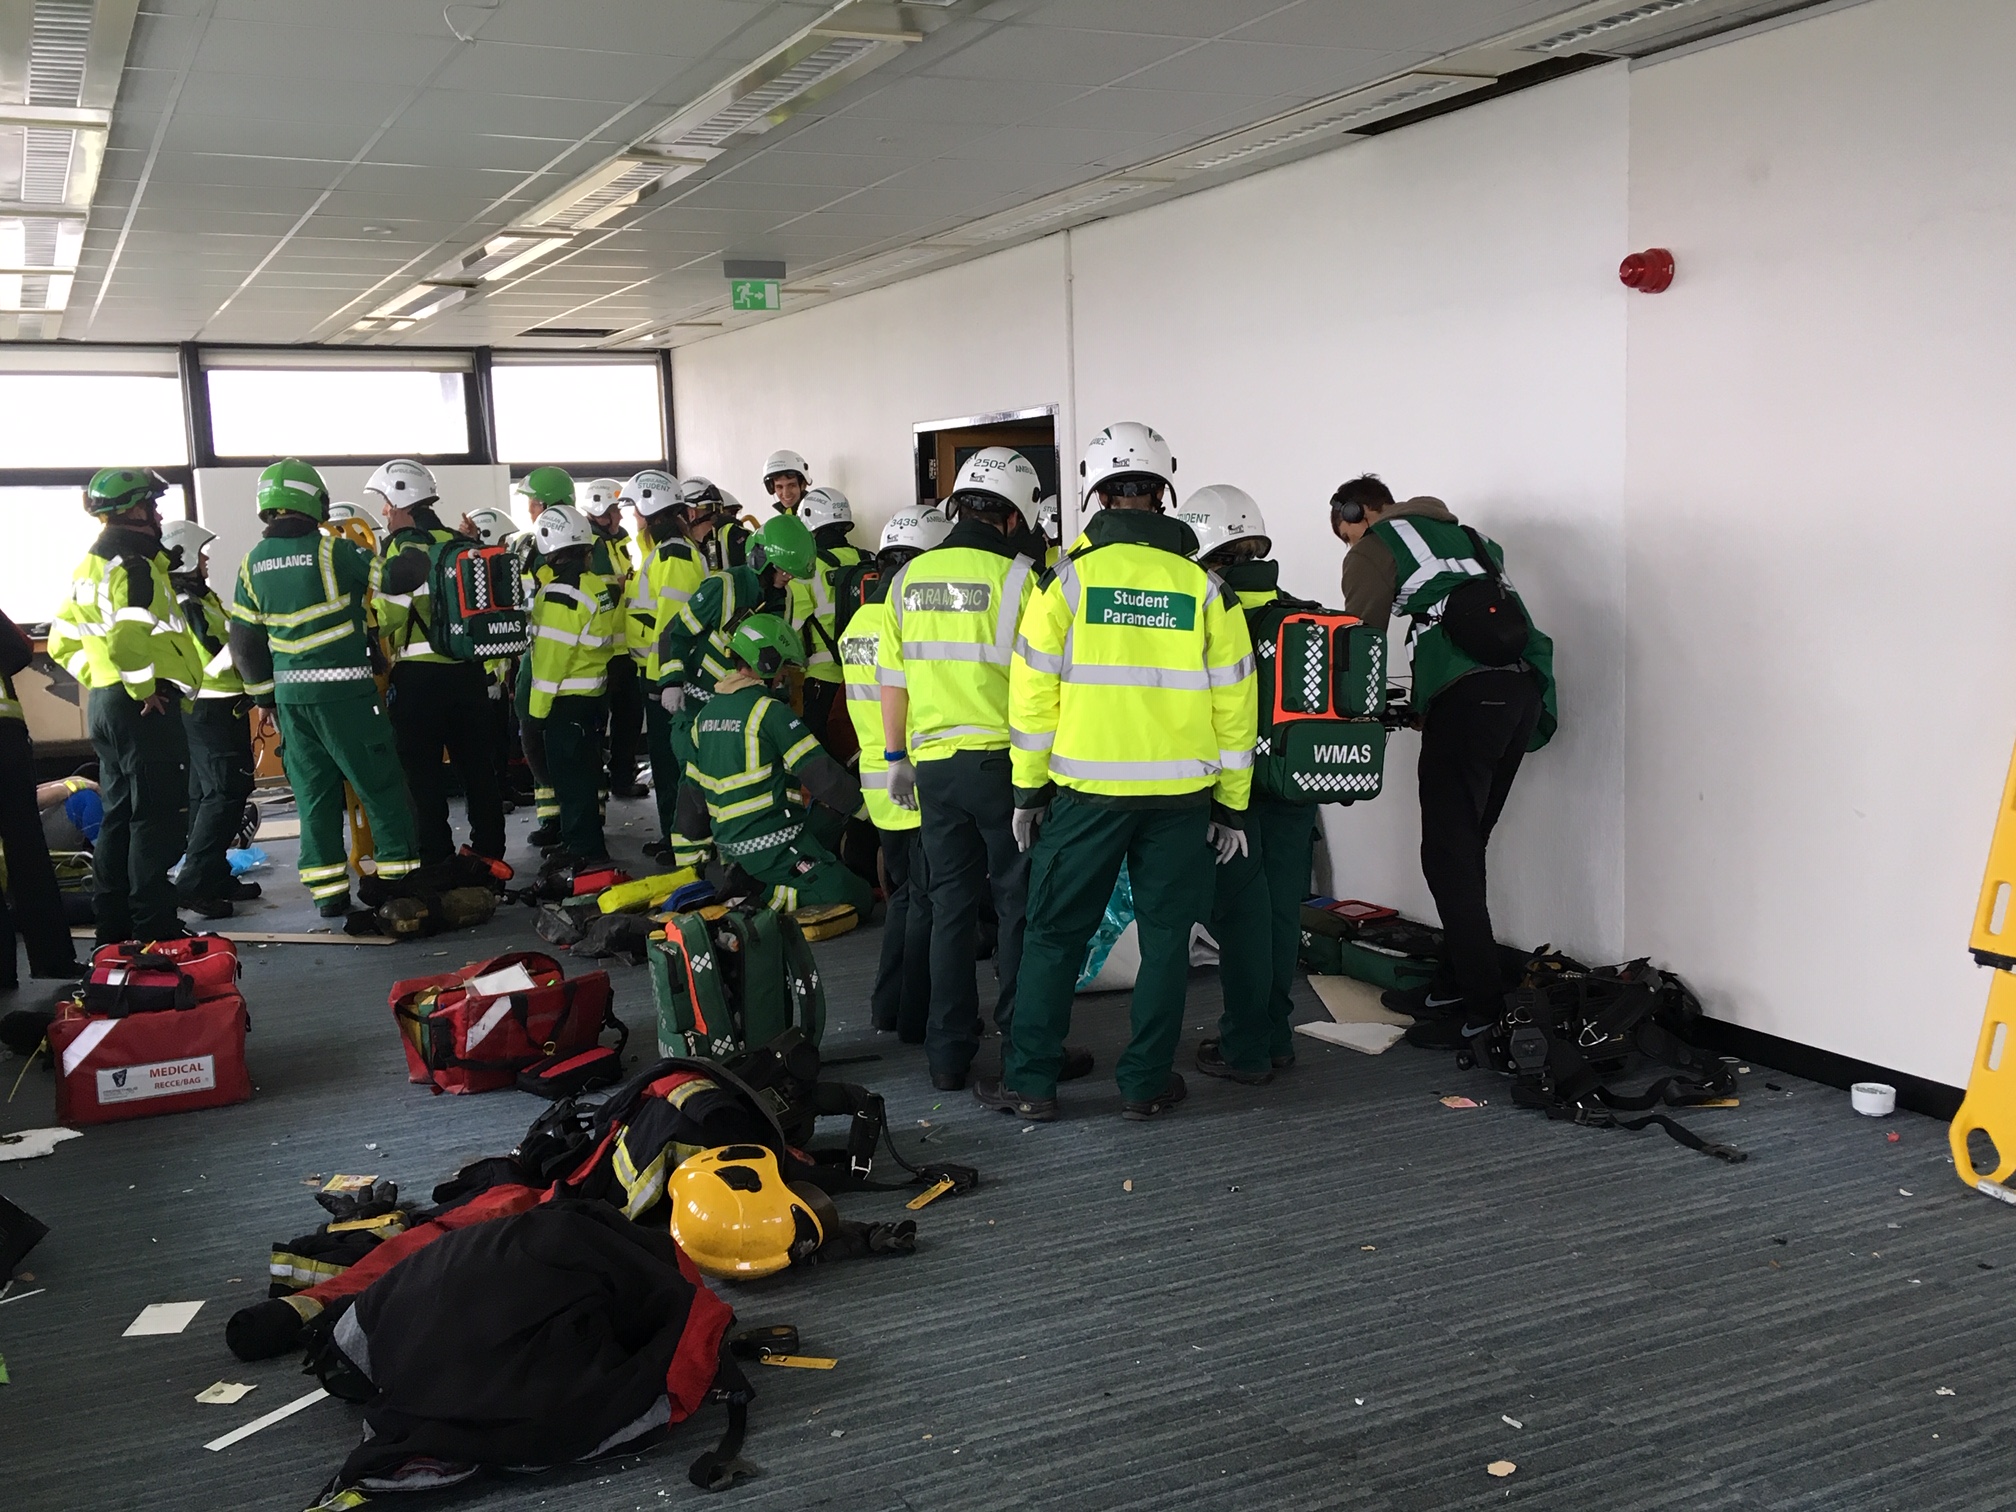 Student paramedics take part in the emergency services training exercise